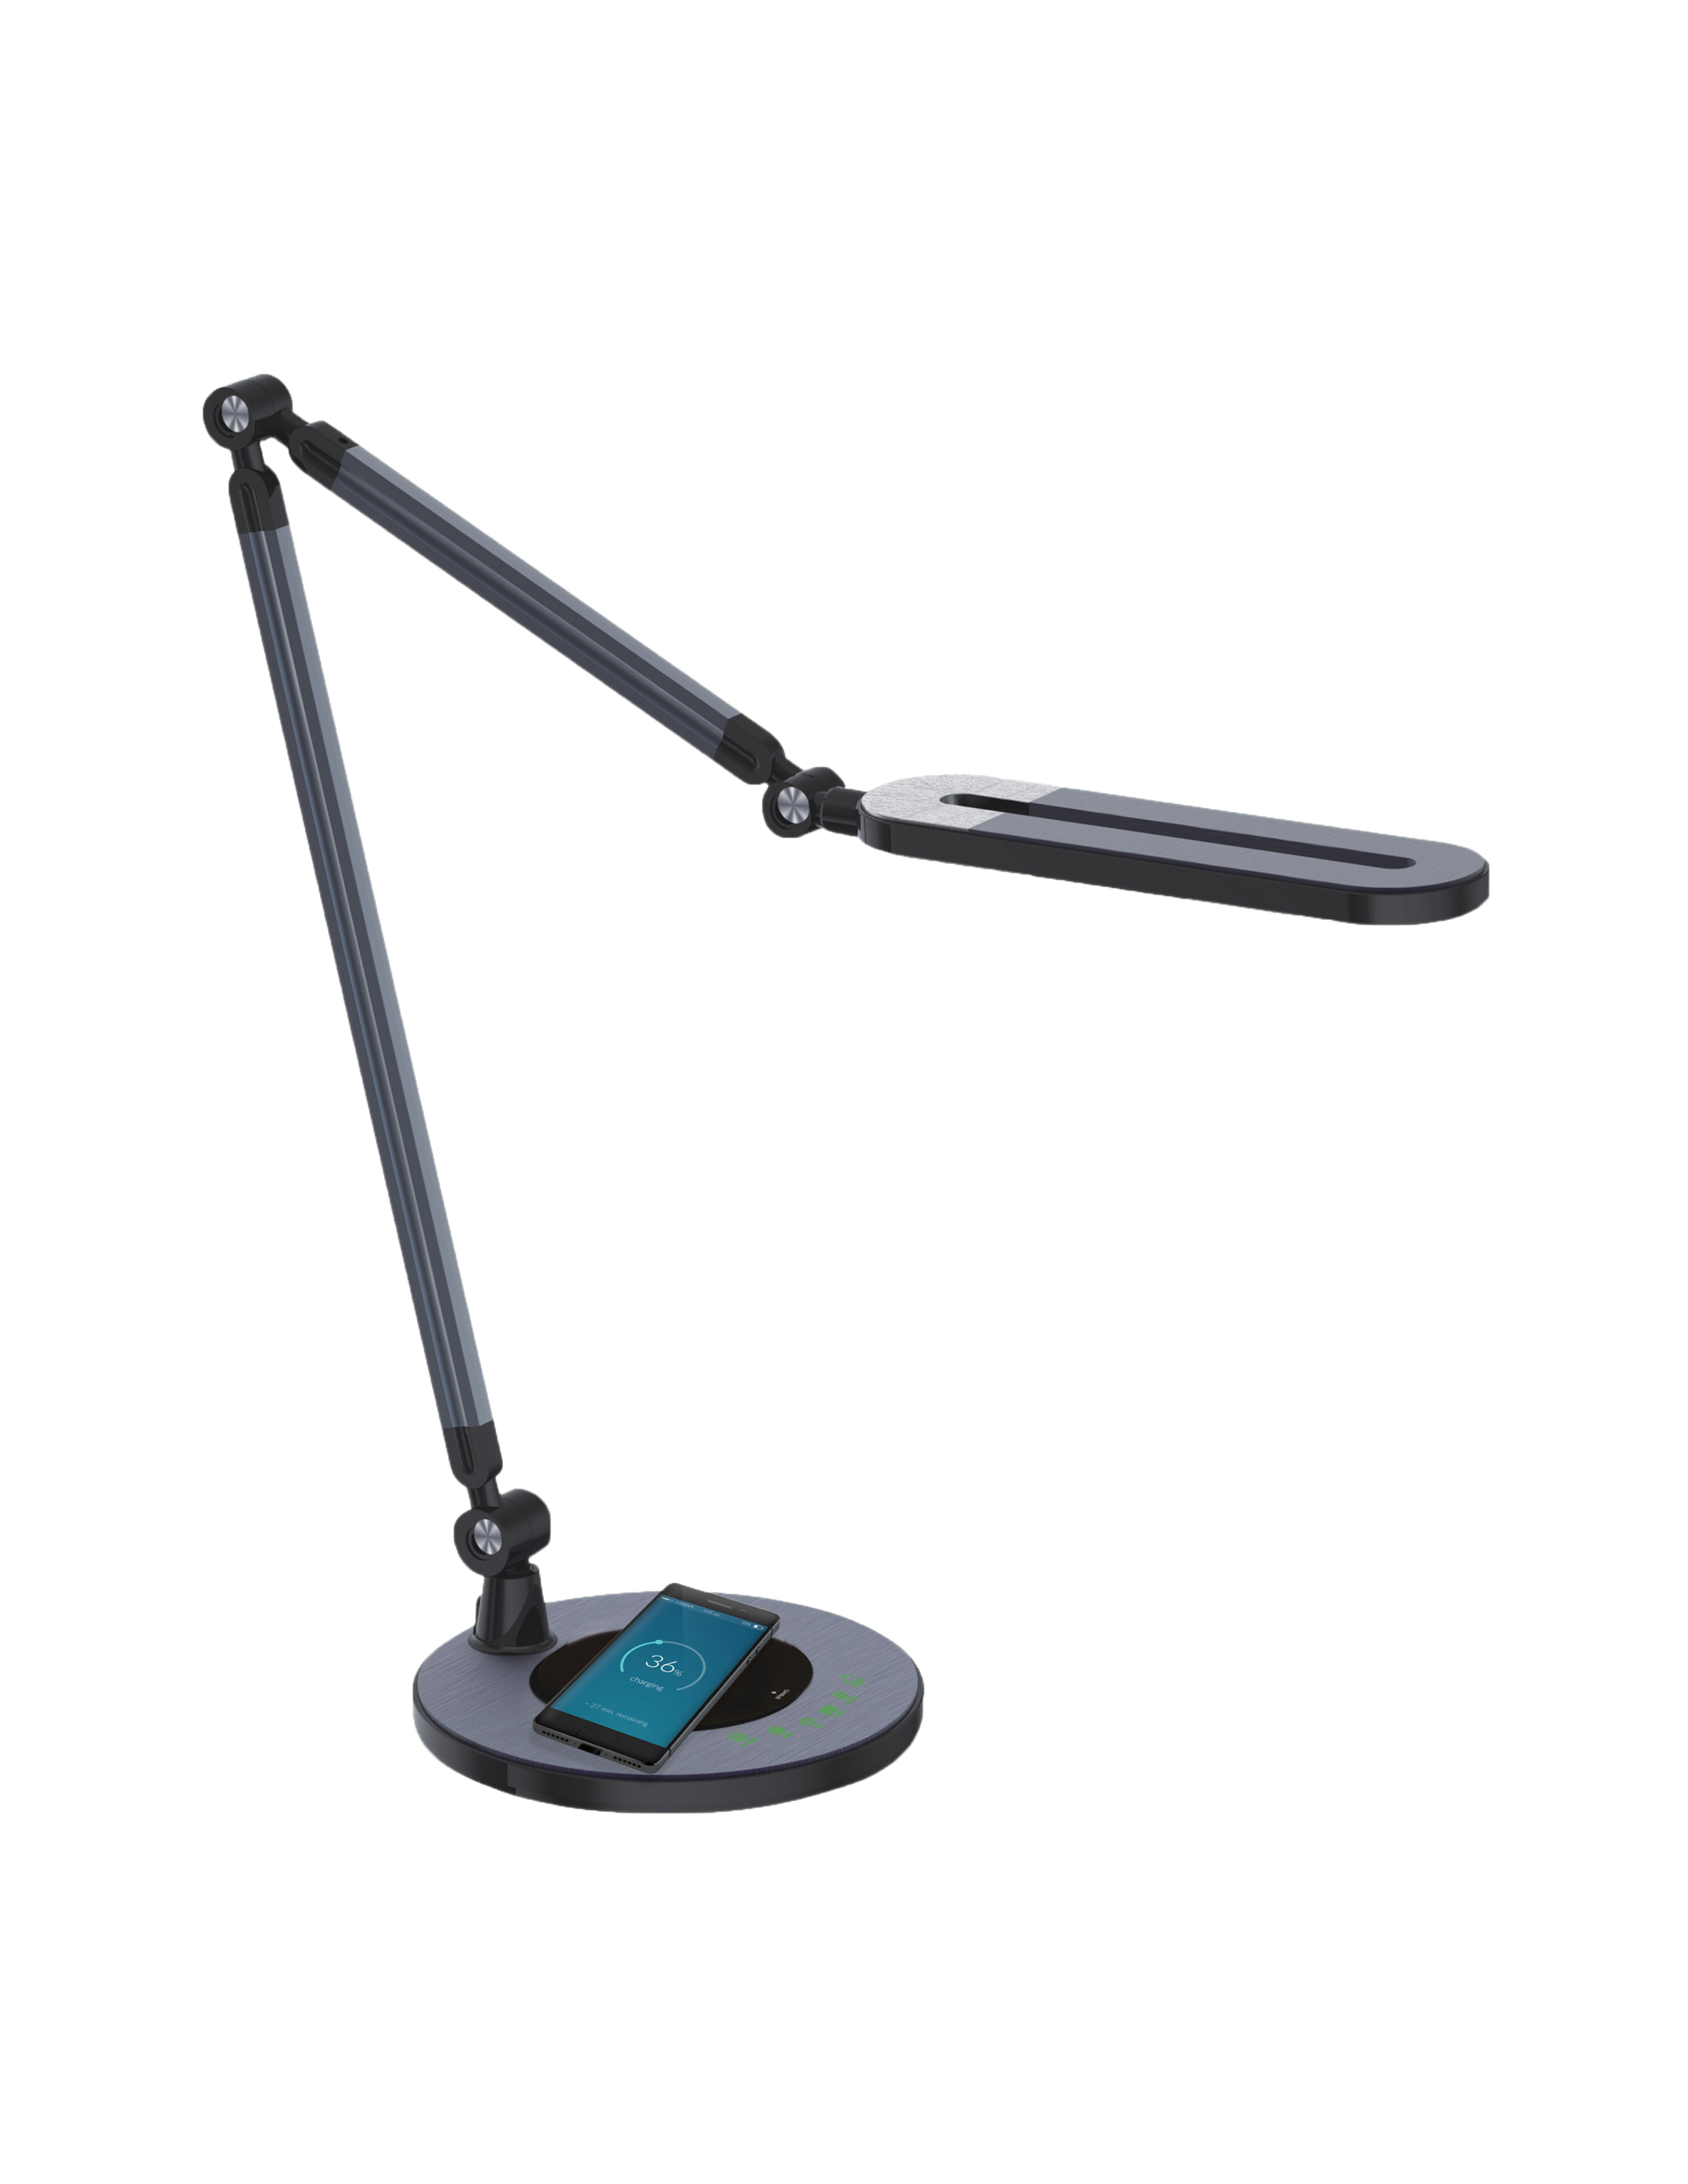 RDL-150QI/ Swing Arm LED Desk Lamp with Wireless Charging